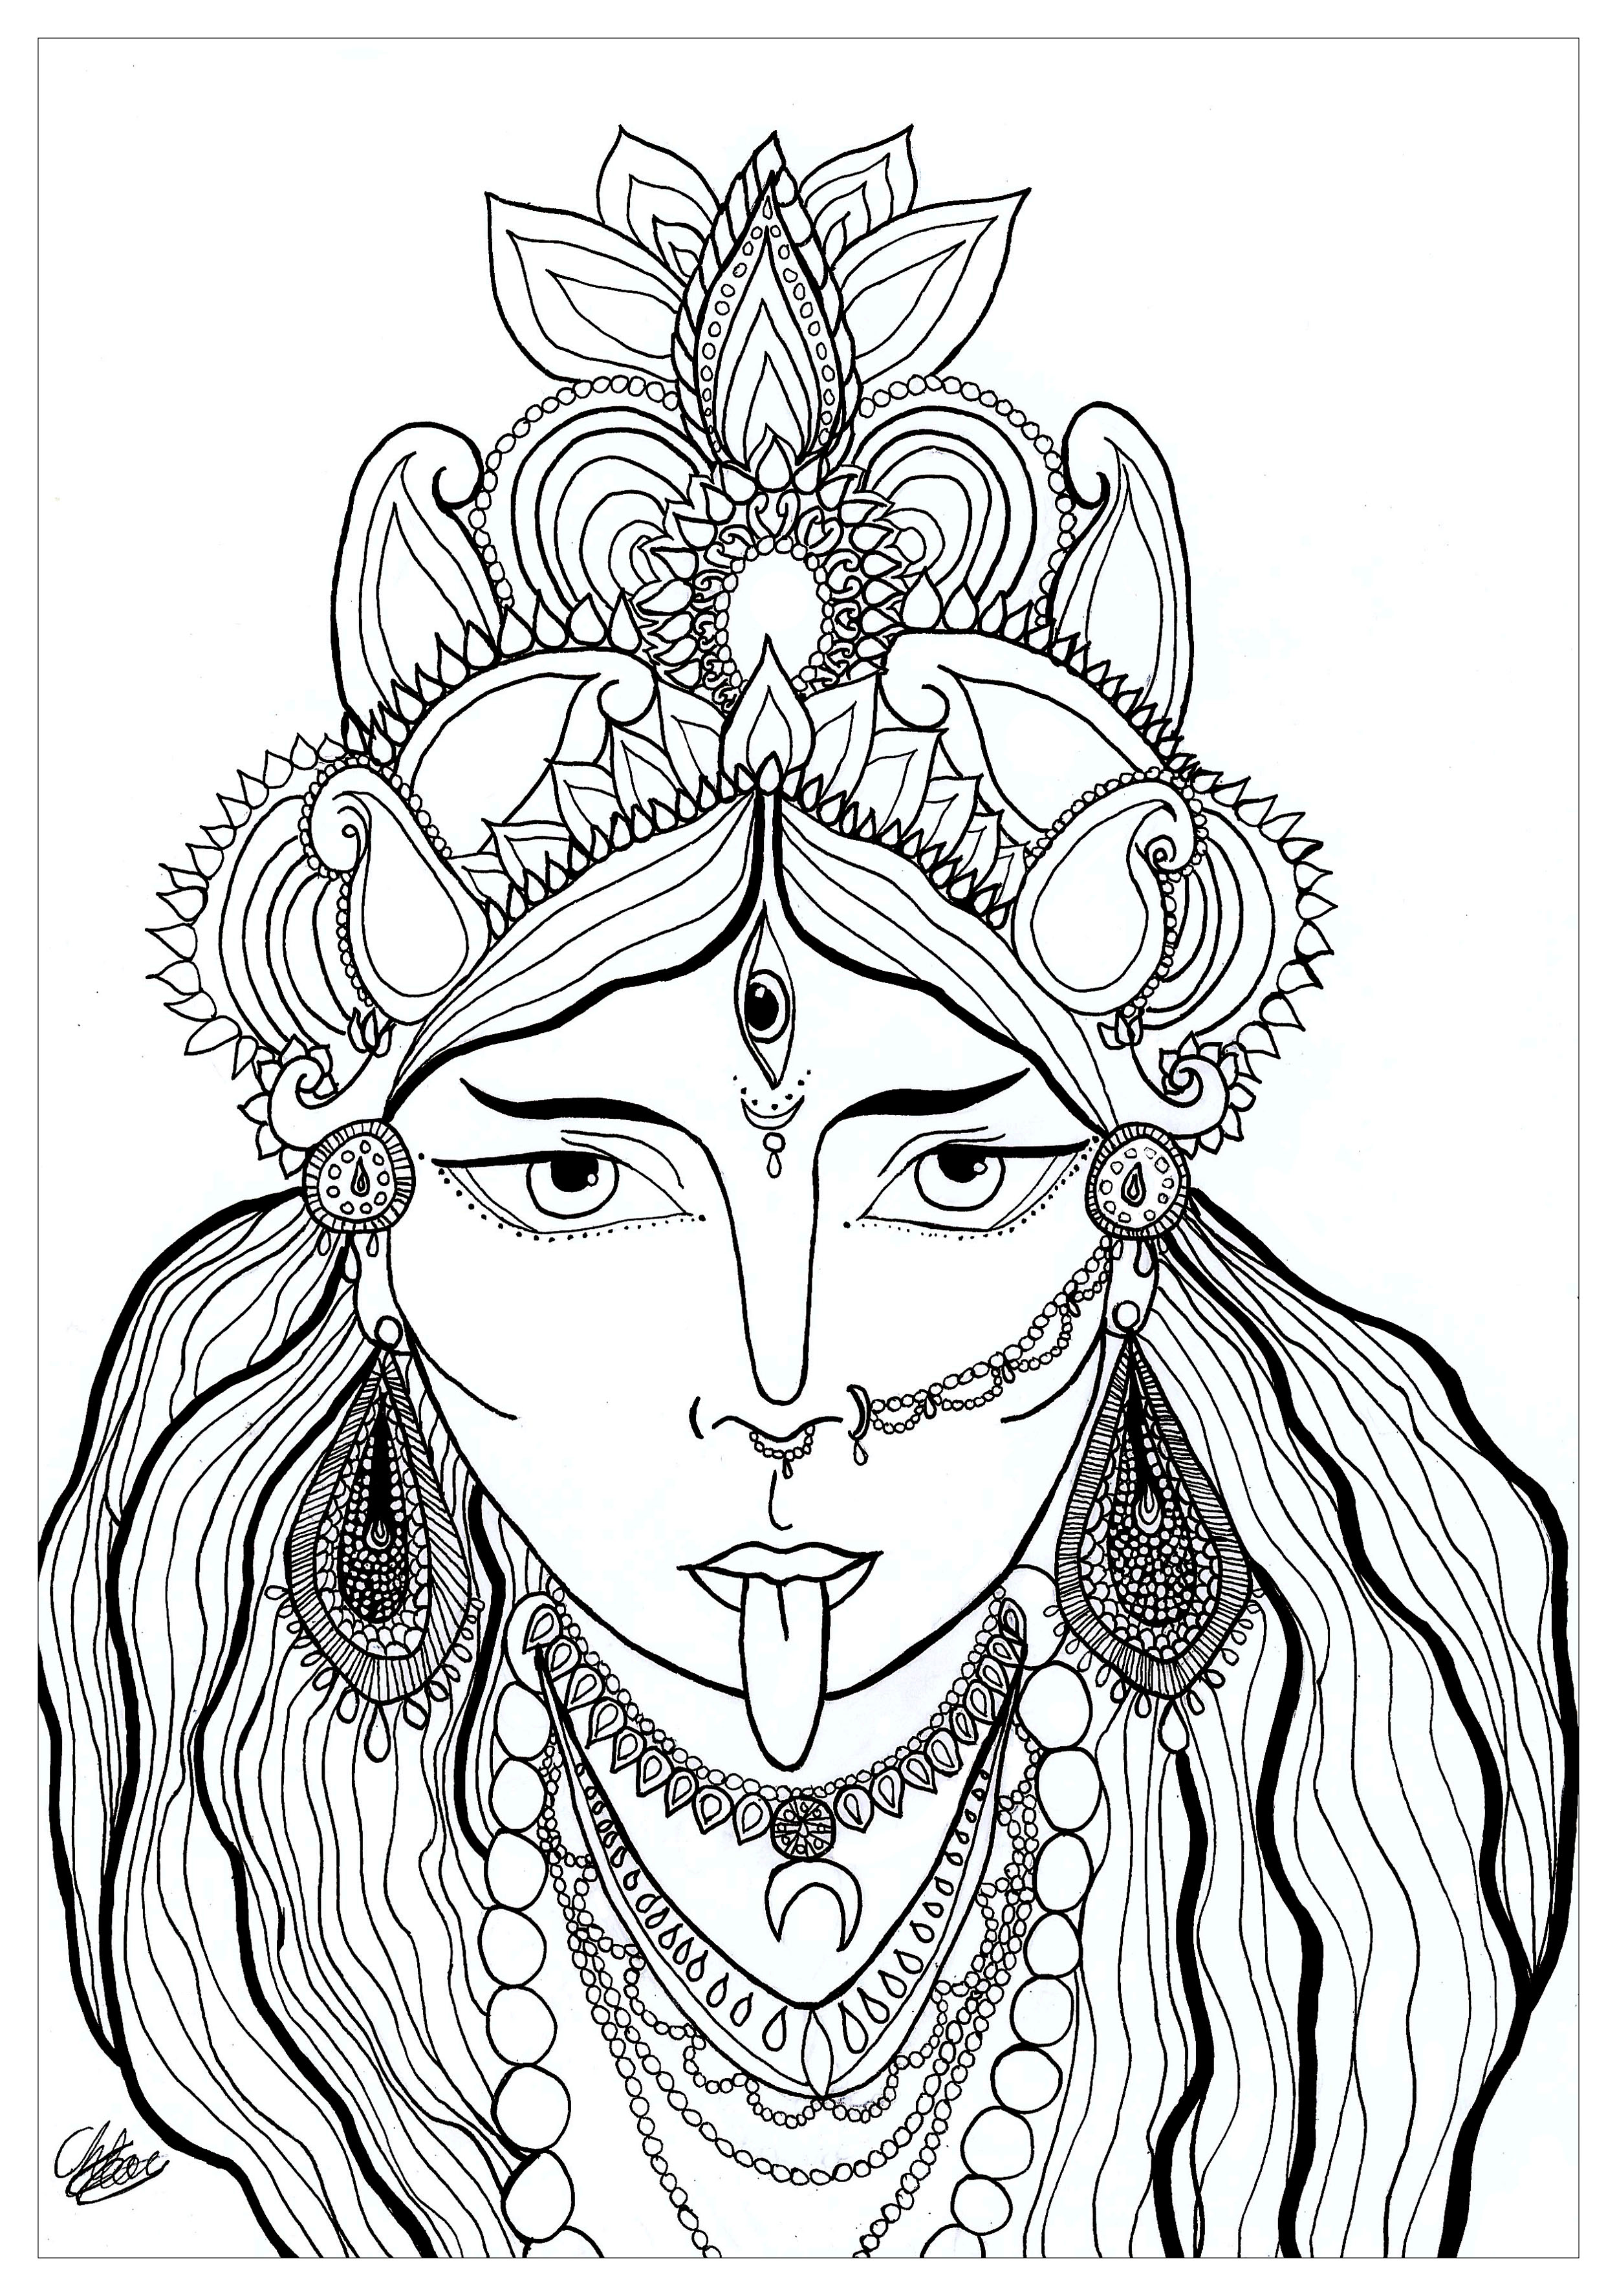 Coloring page of the goddess Kali who comes from the Hindu religion. She is the goddess of preservation, transformation and destruction. Kali is also called the black goddess.